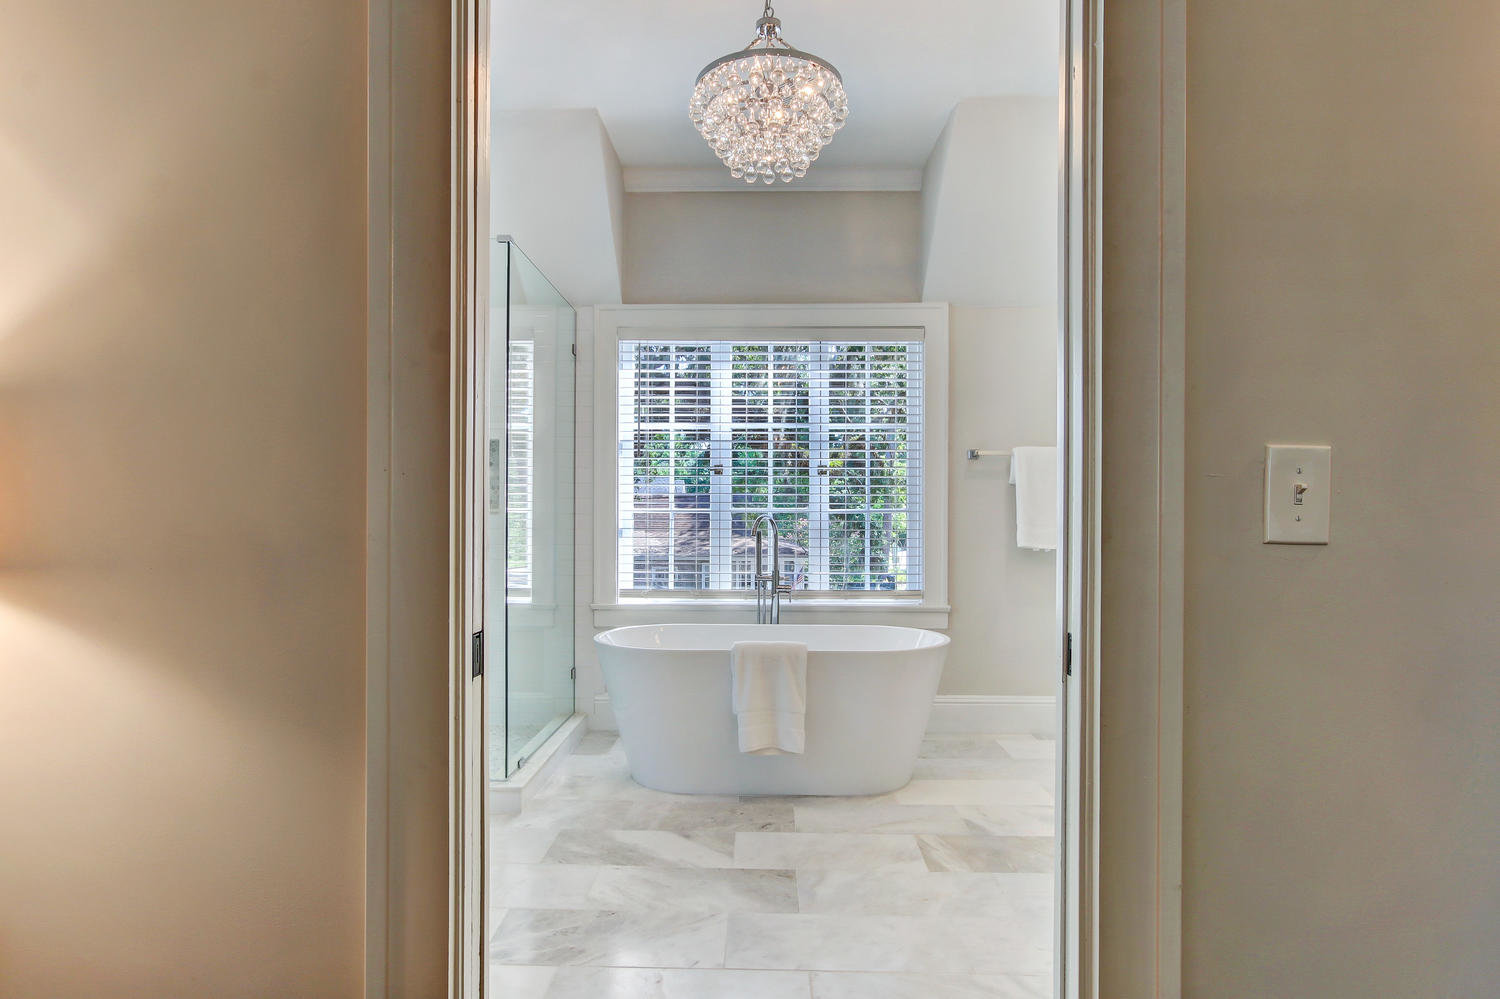 Master bathroom with large soaking tub and neutral colors